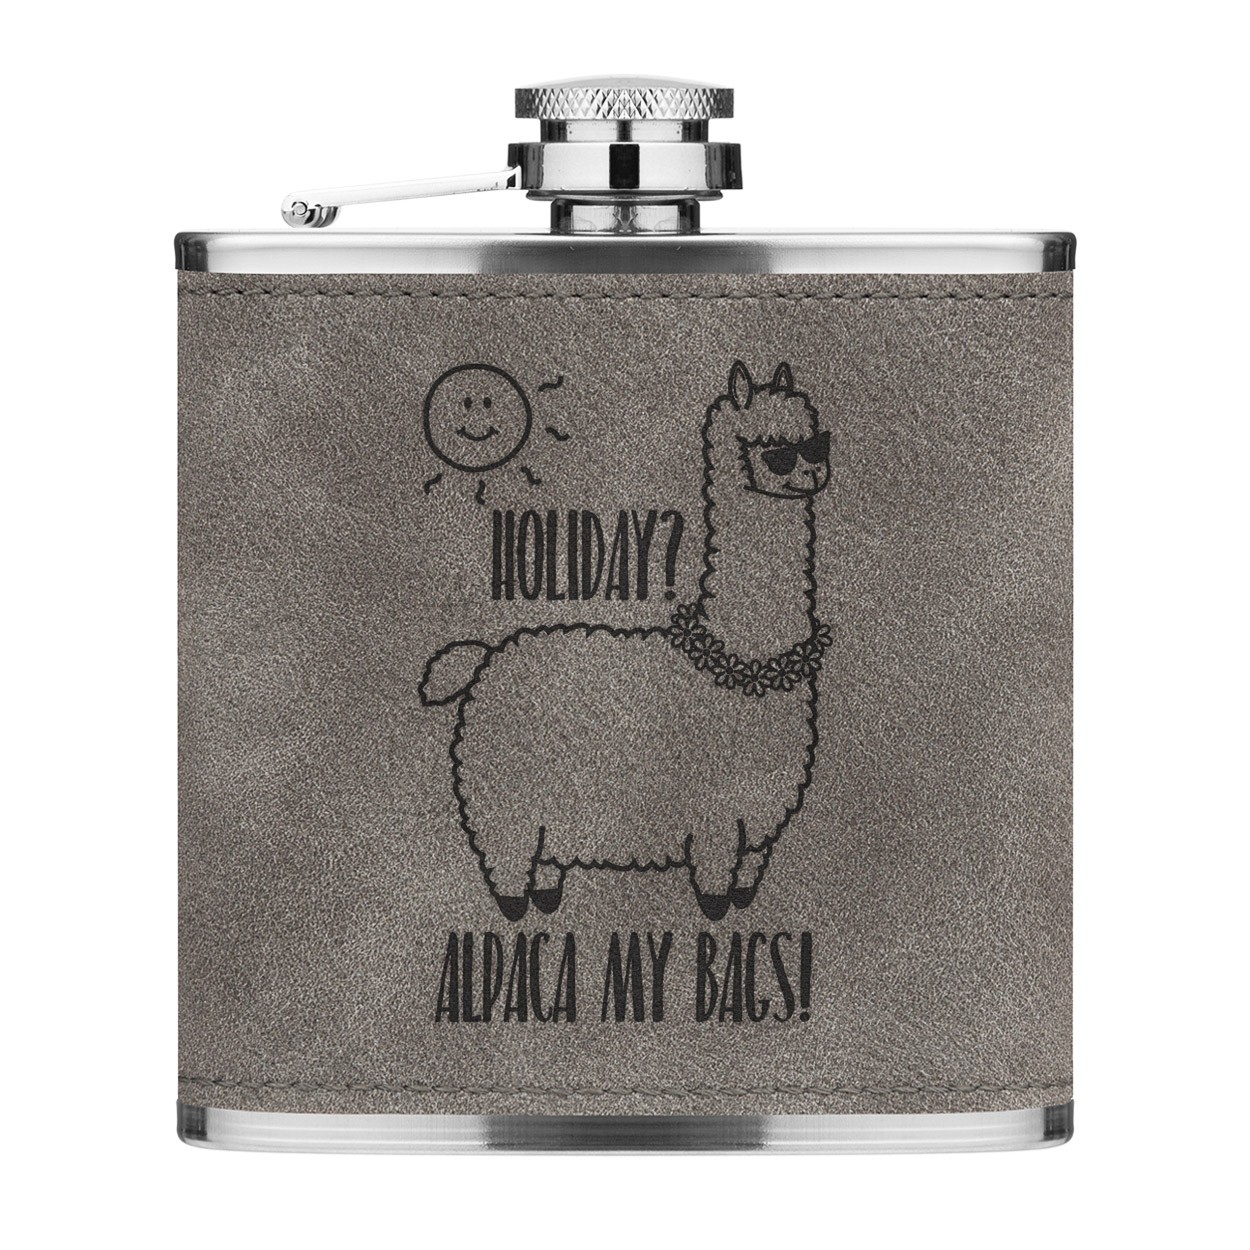 Holiday Alpaca My Bags 6oz PU Leather Hip Flask Grey Luxe